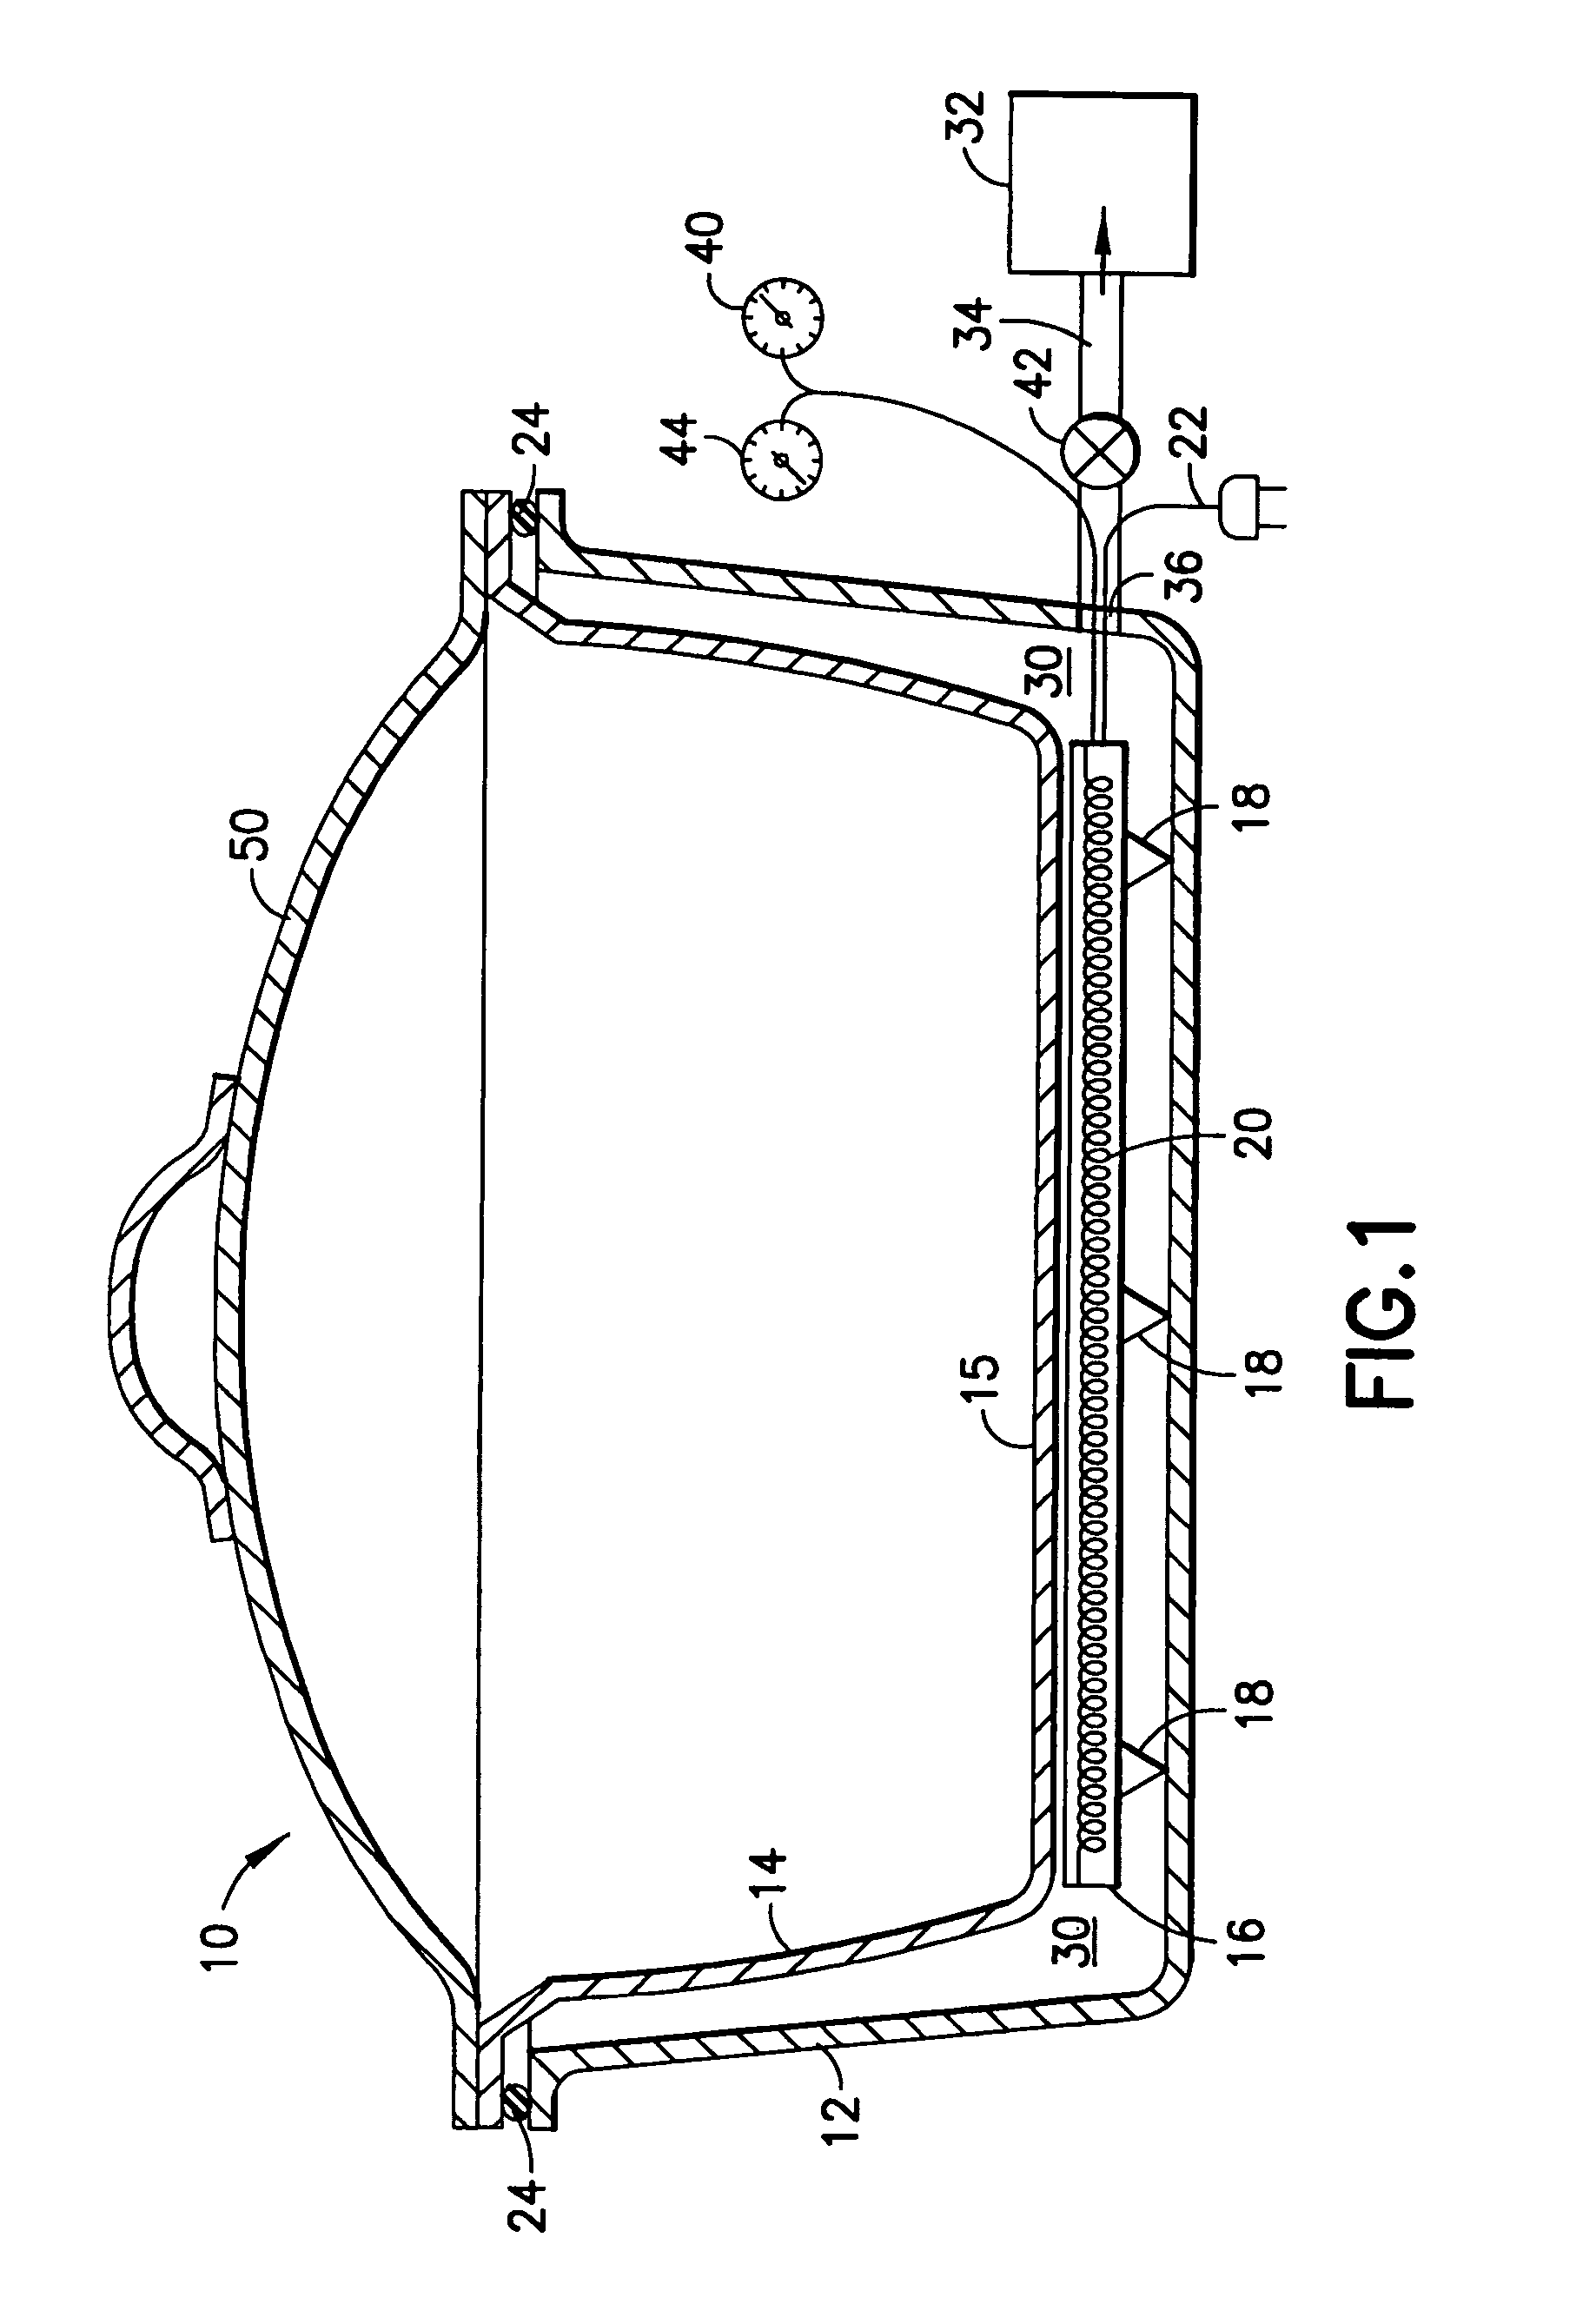 Vacuum cooking or warming appliance